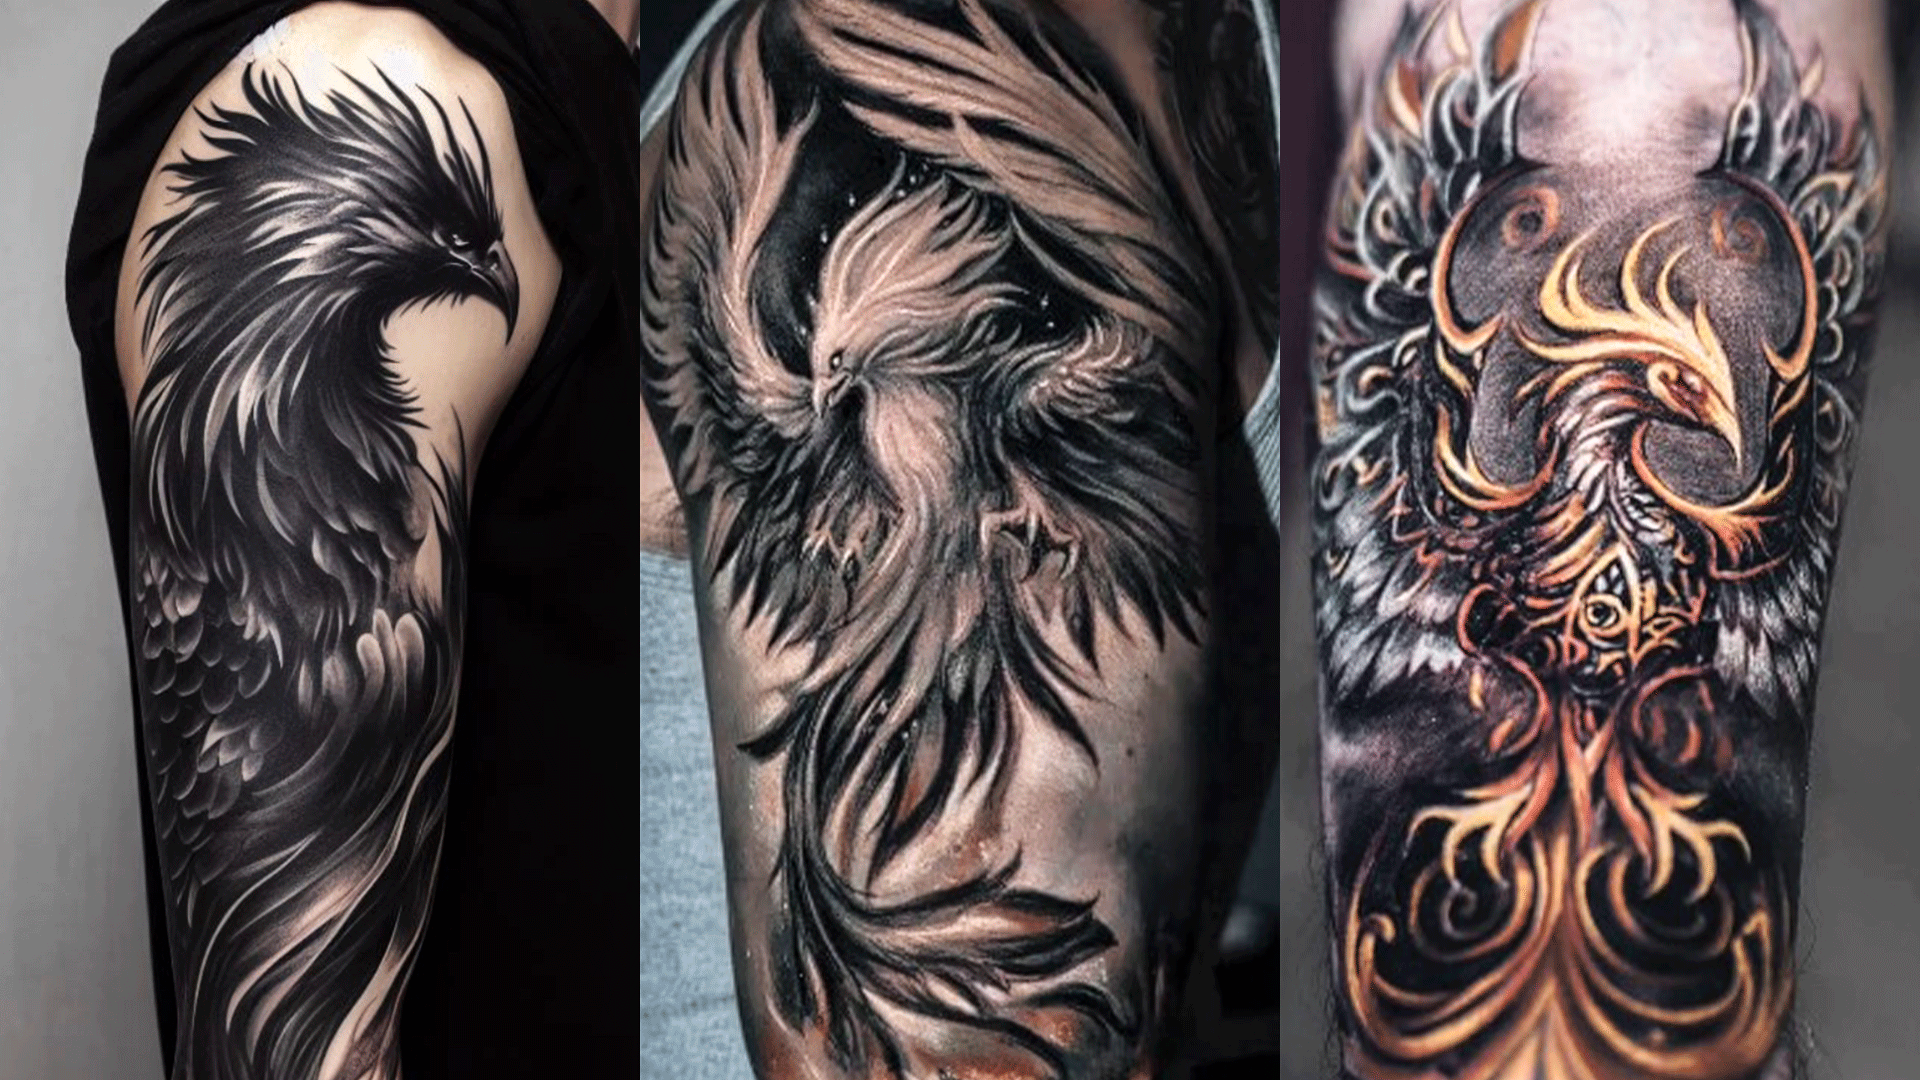 30 Tattoos That You See Too Often But Don't Know The Meaning Behind Them |  Aliens Tattoo - Blog